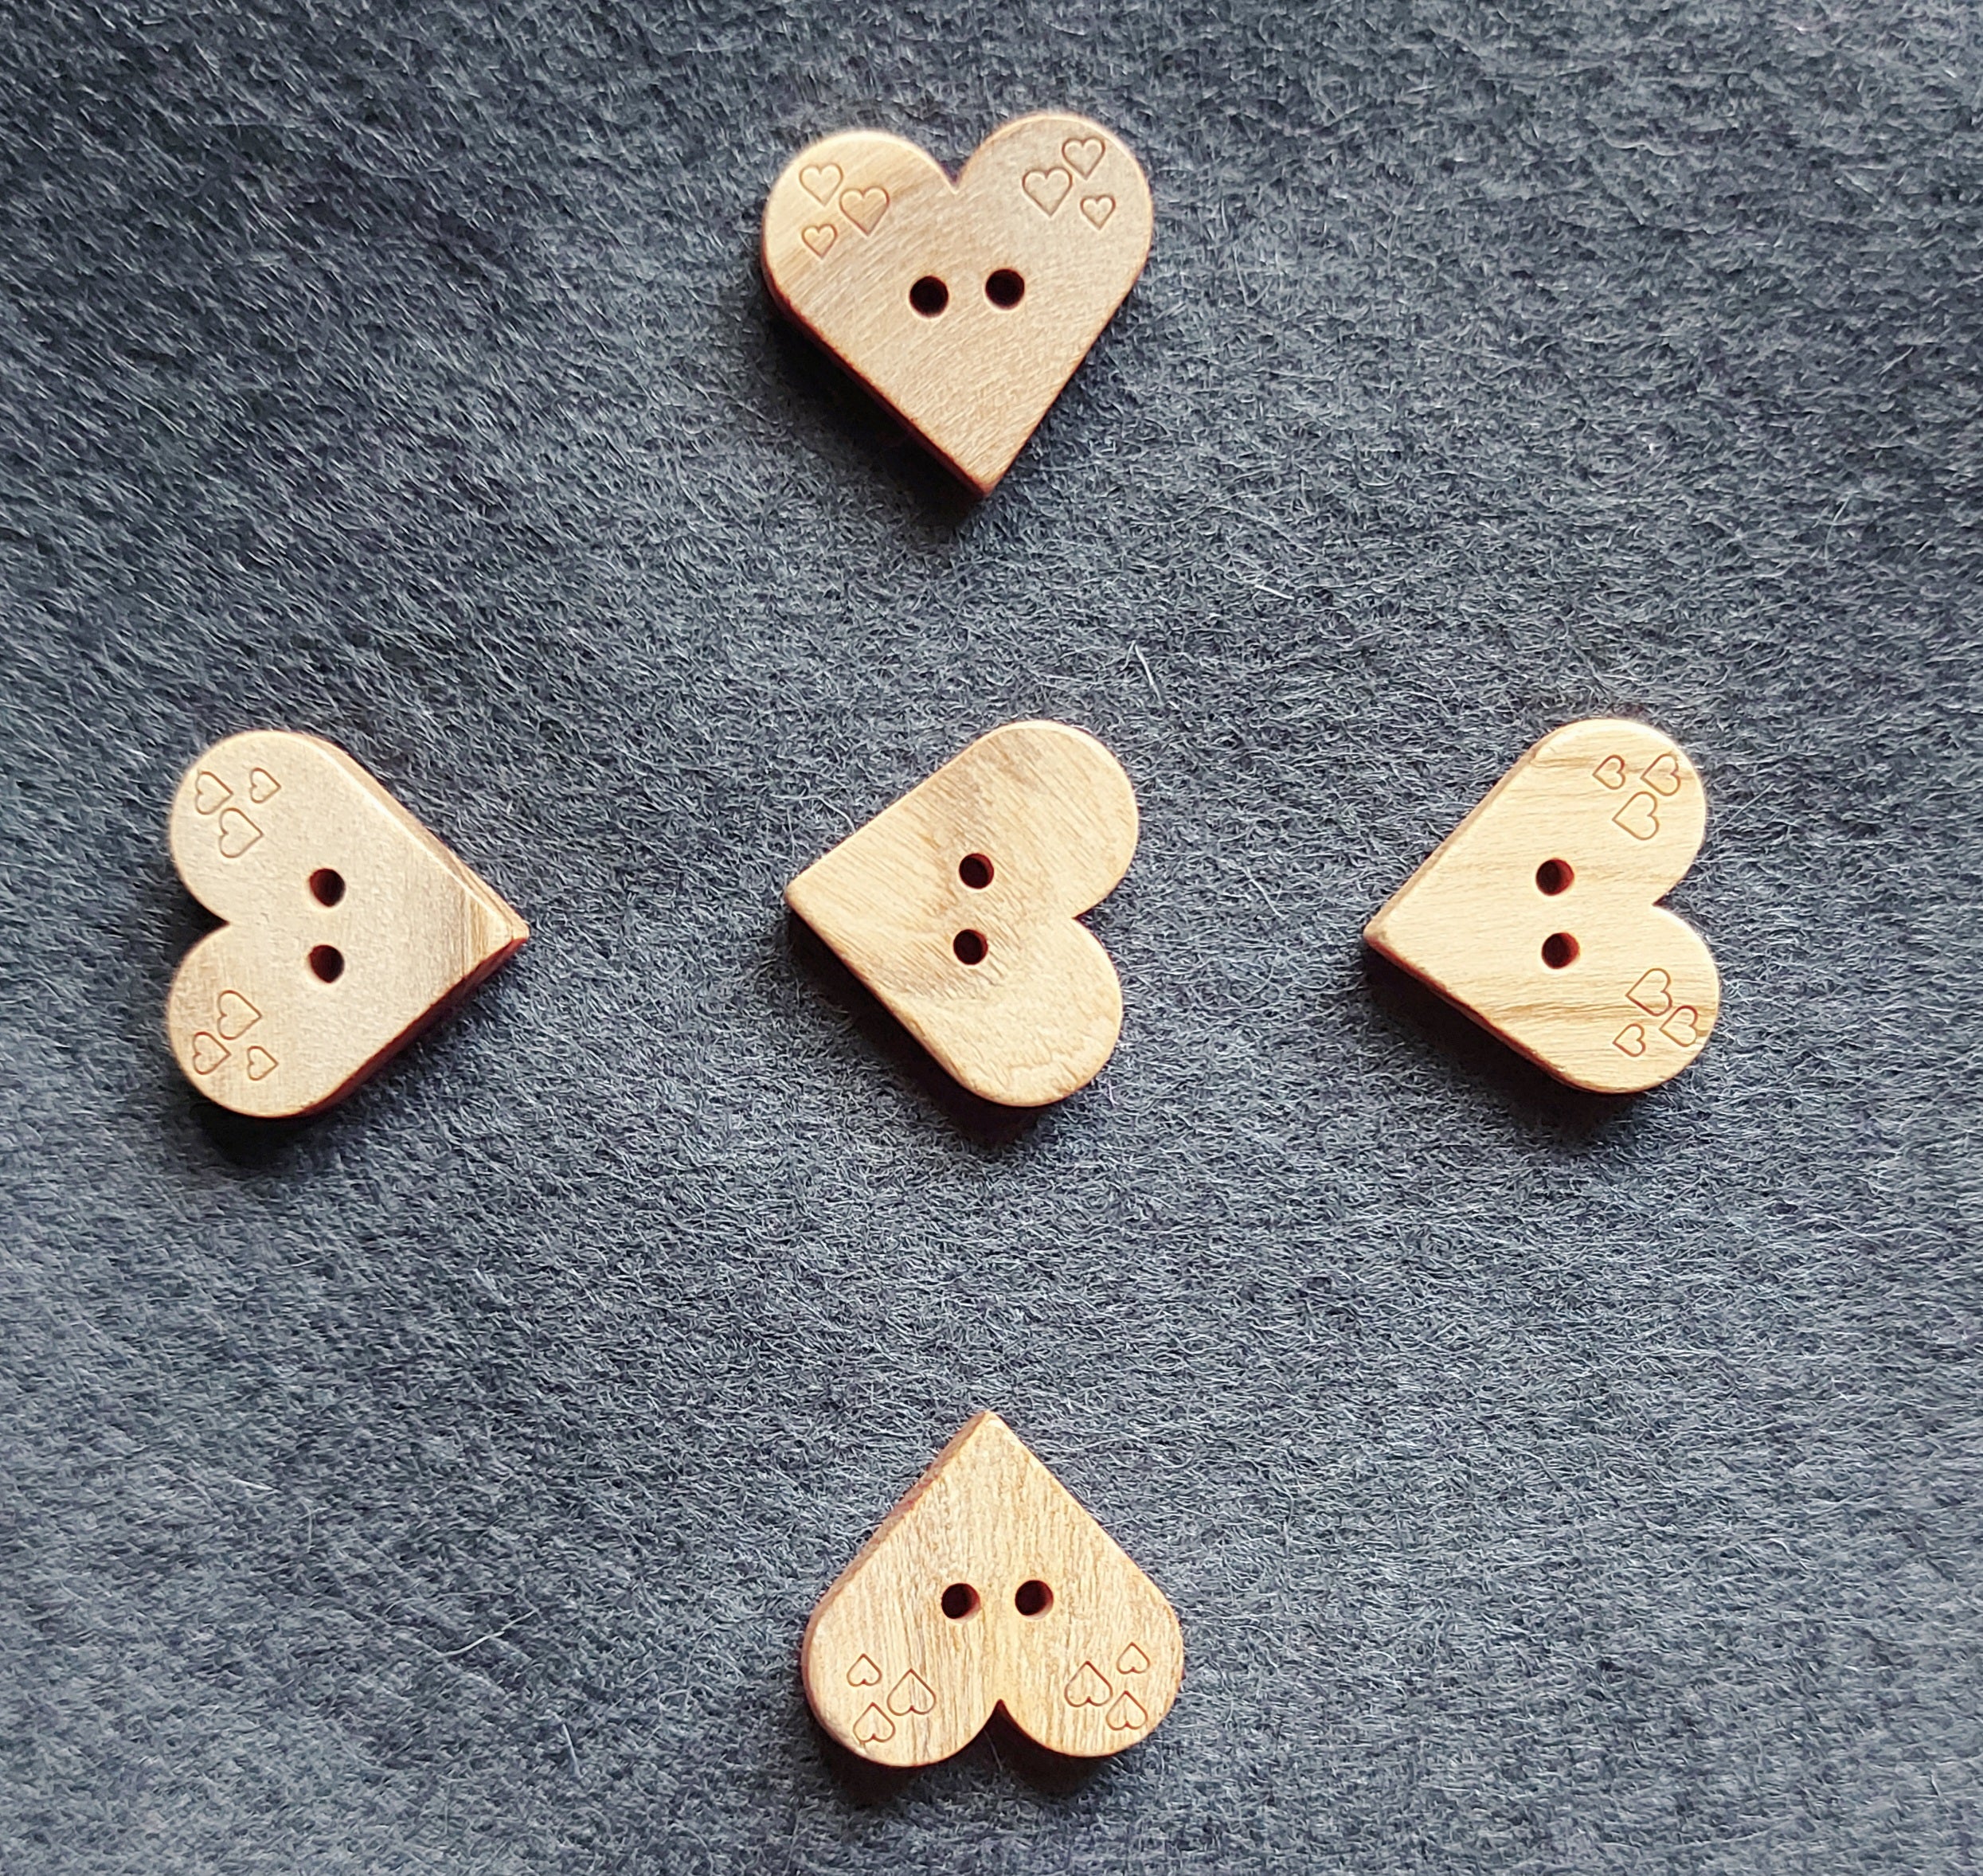 20mm Wooden Heart-shaped Buttons - pack of 5 – Cloud Craft